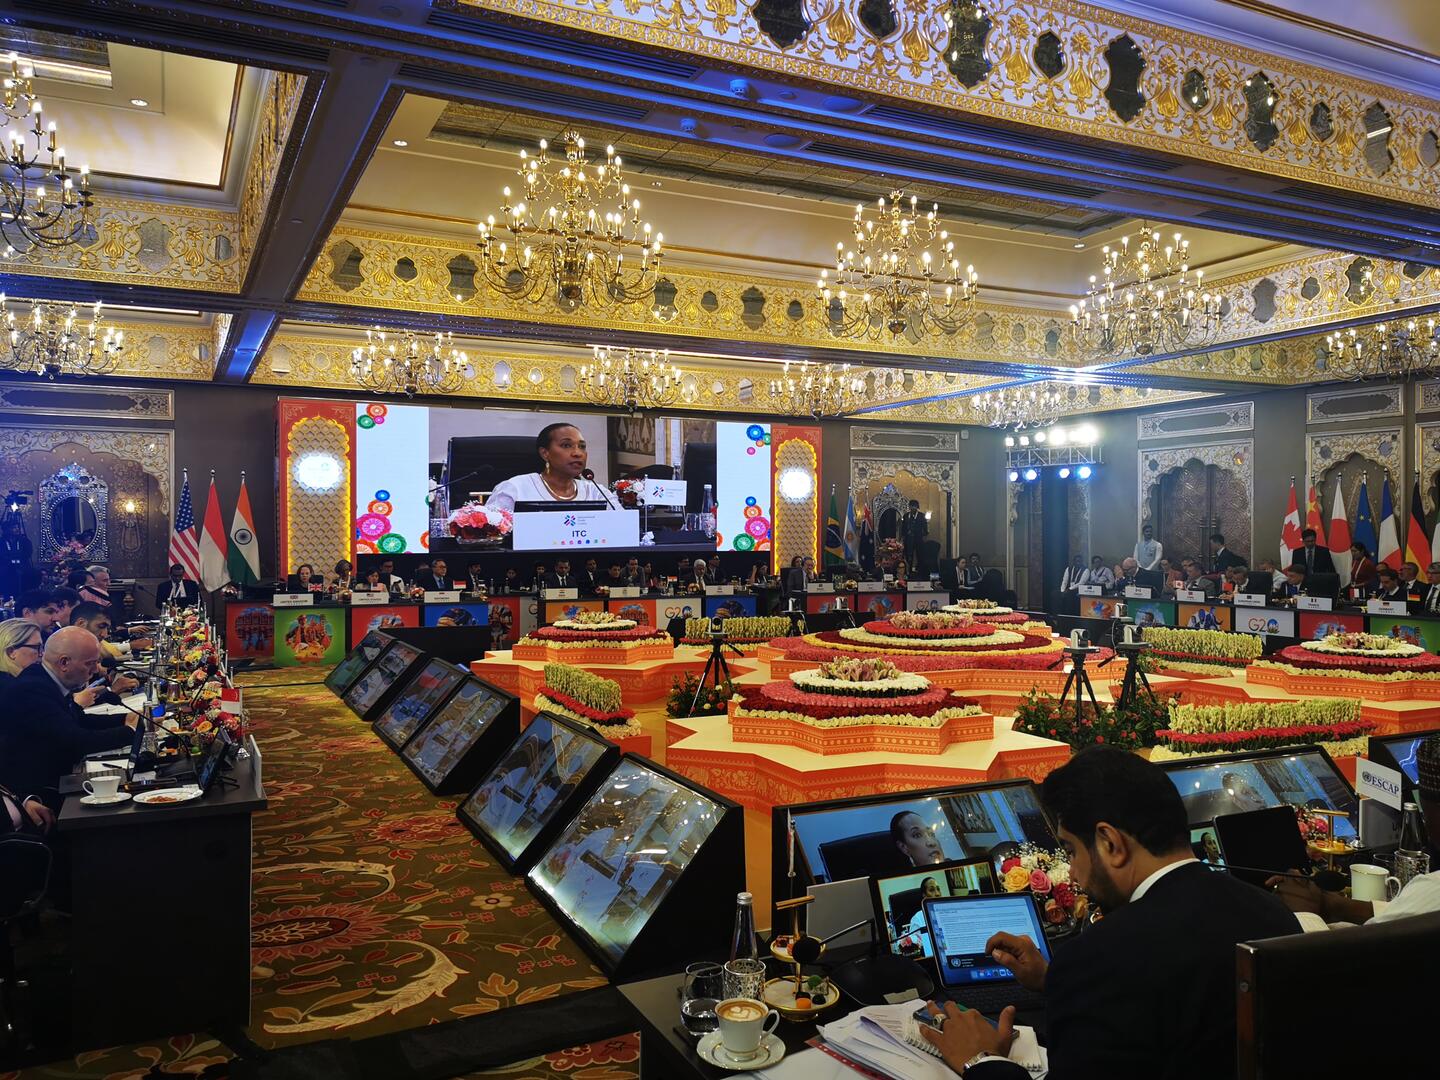 ITC executive director Pamela Coke-Hamilton addressing G20 ministers on a large projector screen, with the ministers shown seated around the perimeter at tables facing inwards, with a large floral display in centre of room.